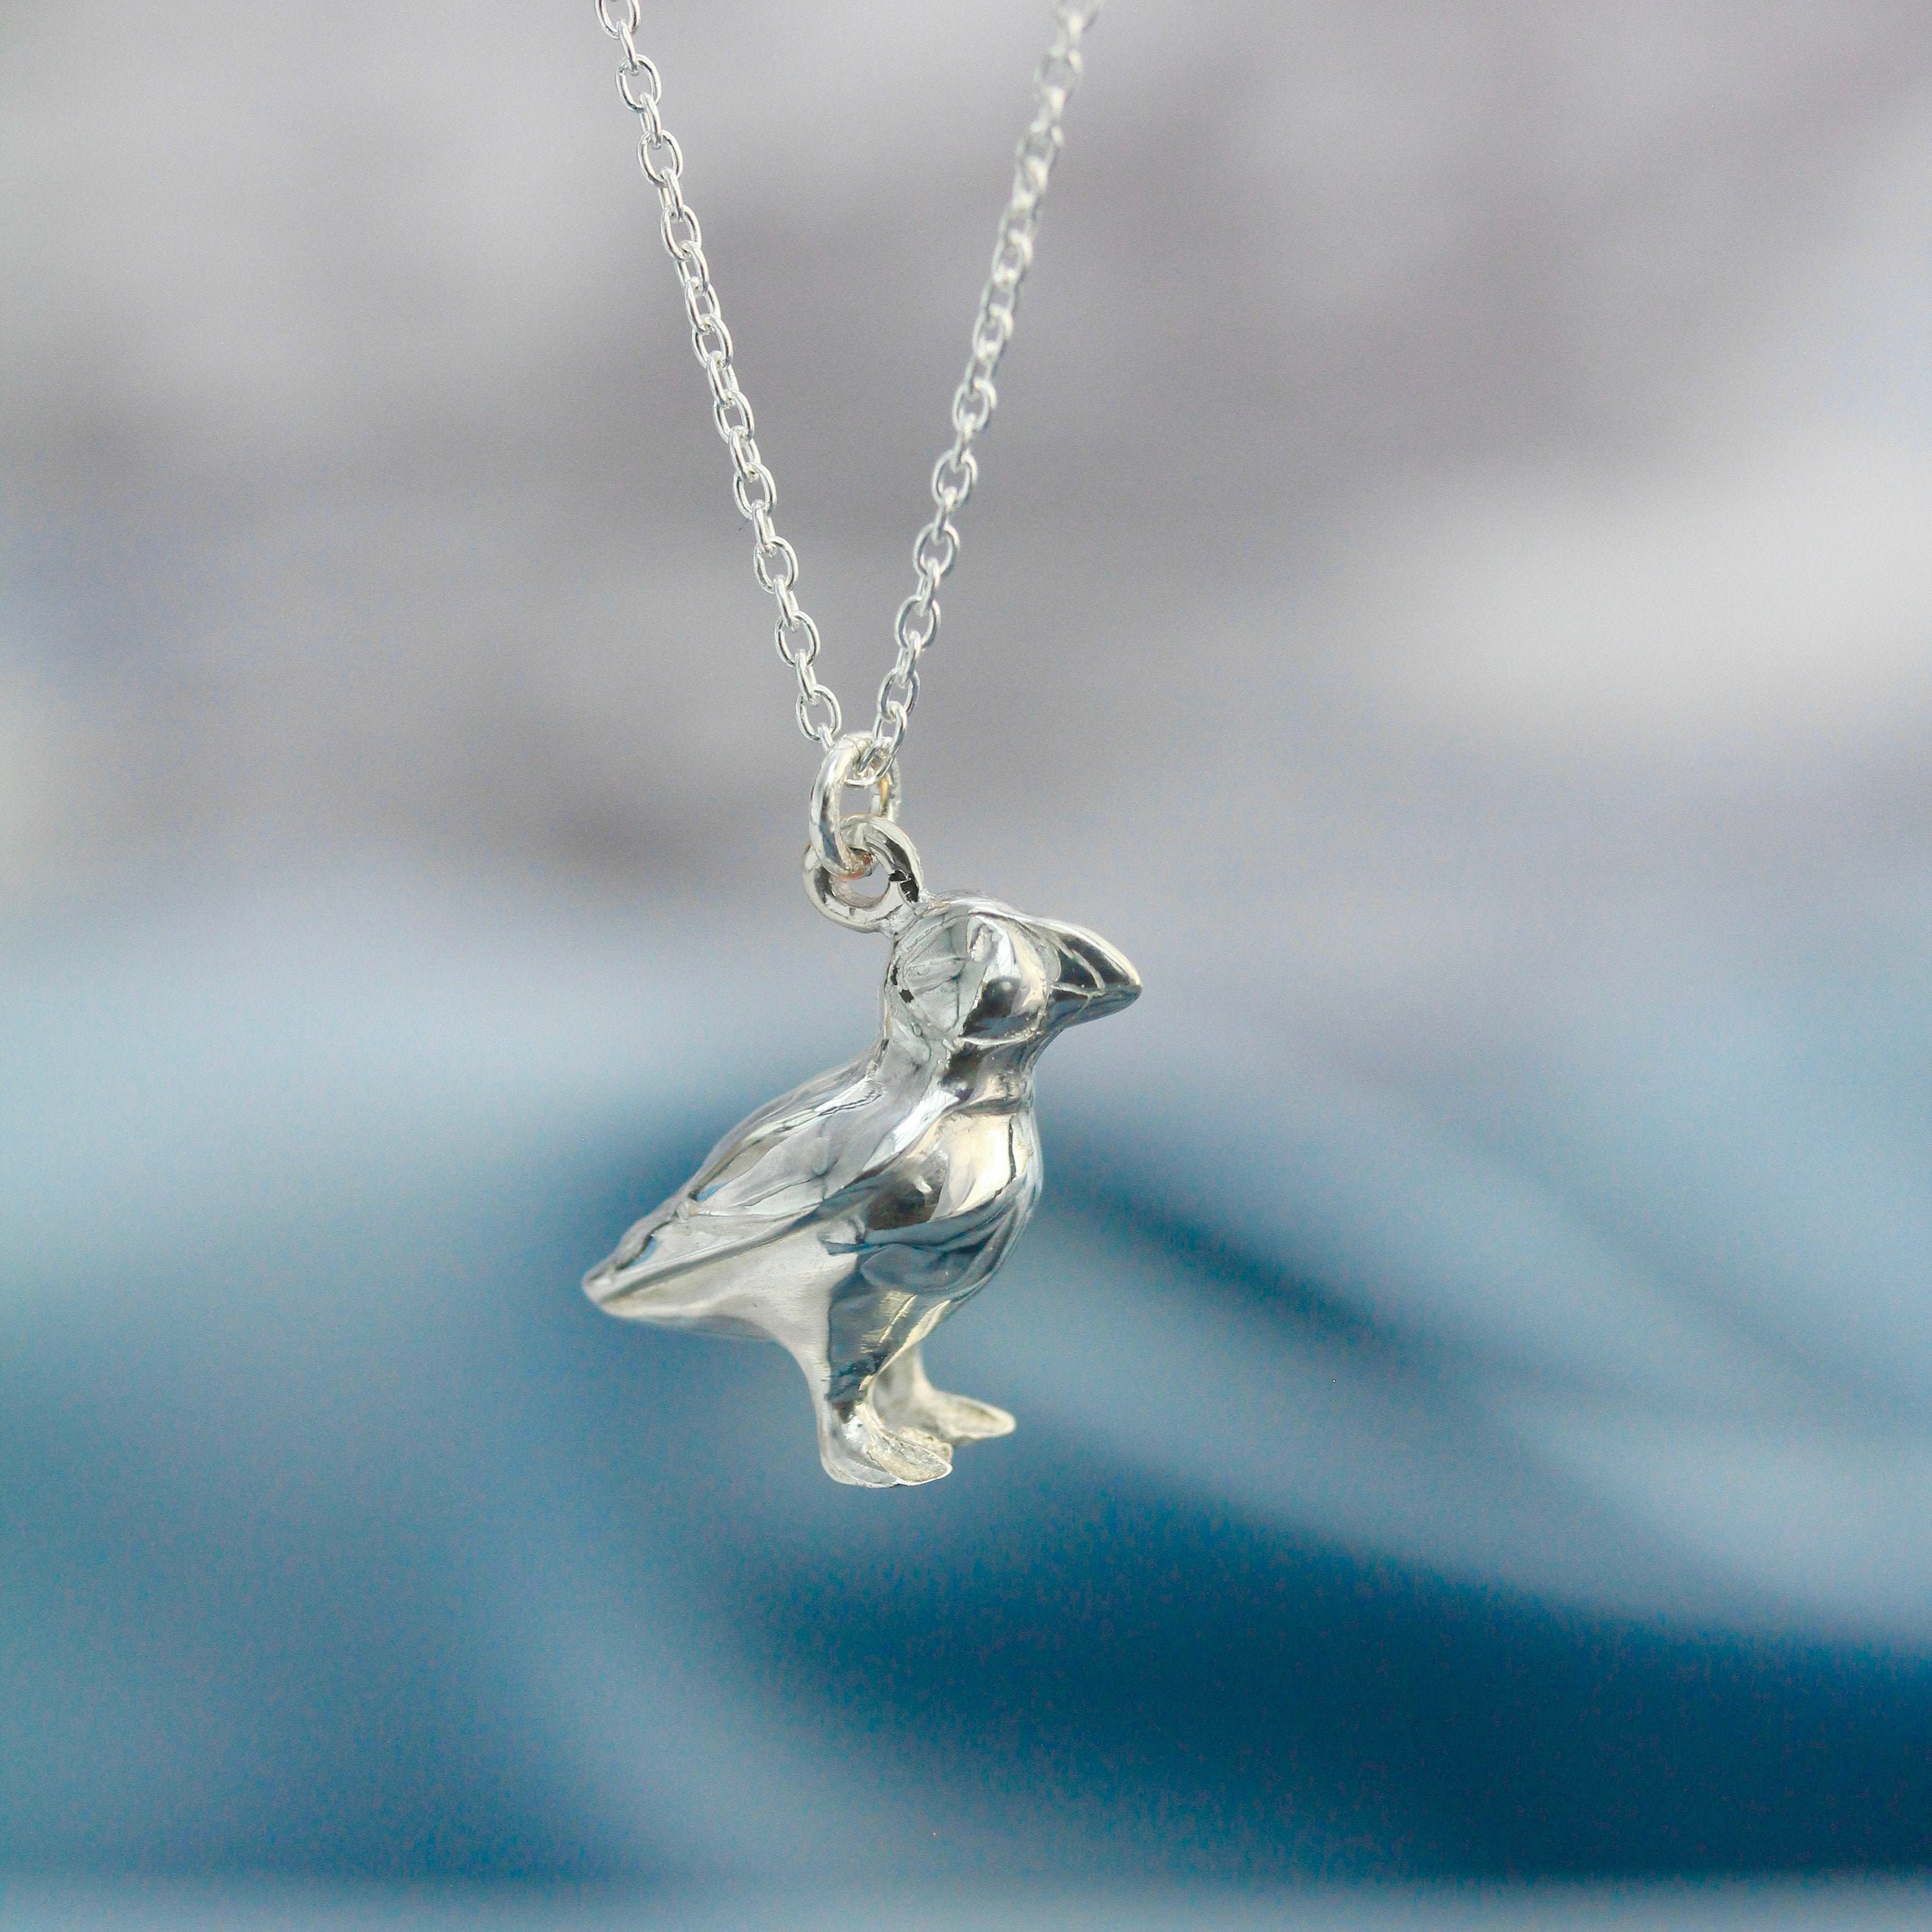 Puffin Necklace | Sterling Silver Puffin Pendant Personalised Animal Pendant By Rosalind Elunyd Jewellery